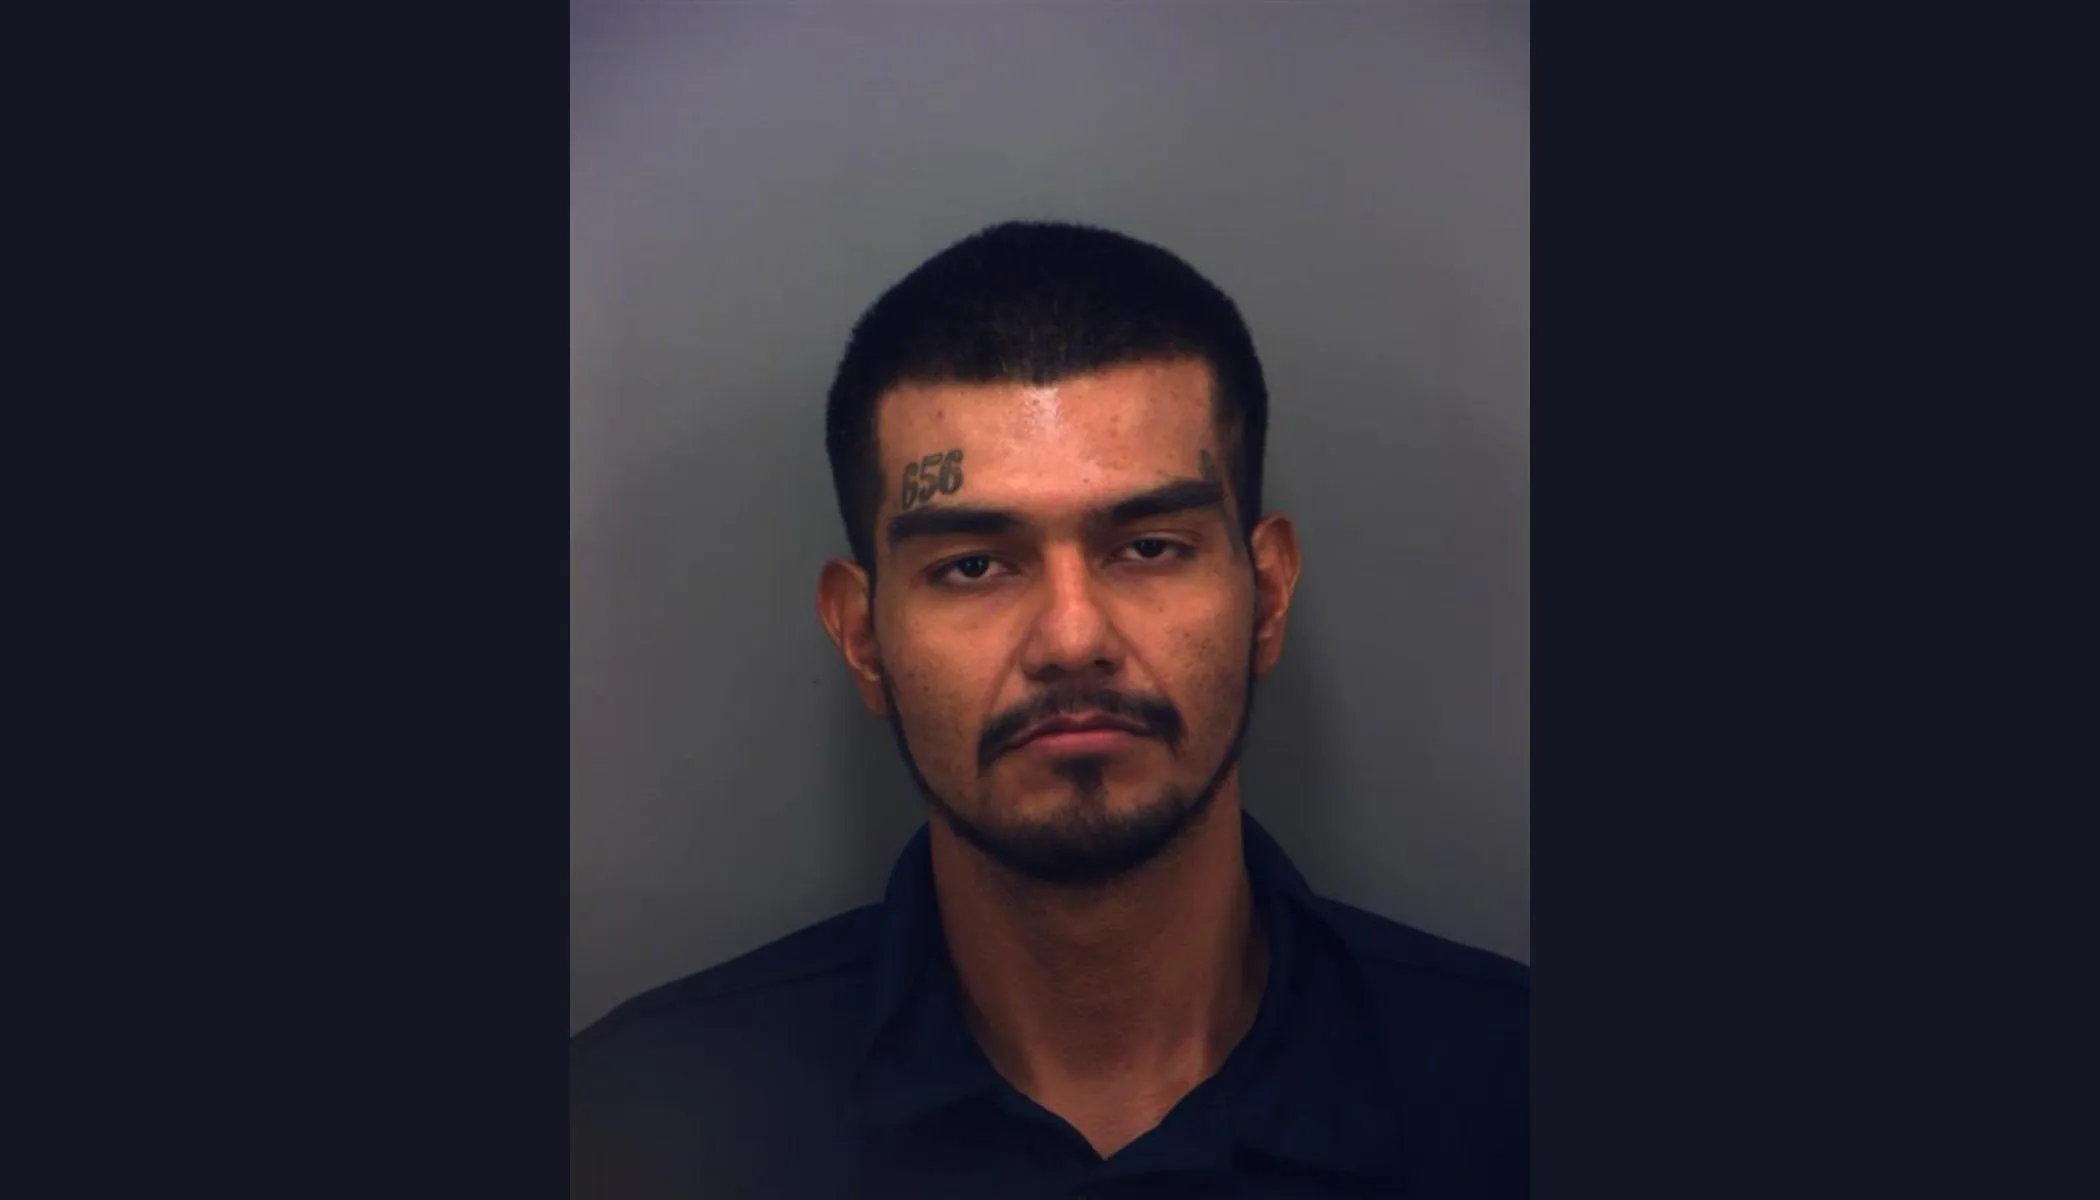 The El Paso Police Department said in a July 28, 2023, news release that it had arrested 27-year-old El Paso resident Isaac Jordan Soto-Olivarez in connection with a July 17, 2023, vandalism incident at Most Holy Trinity Catholic Church in El Paso, Texas.?w=200&h=150